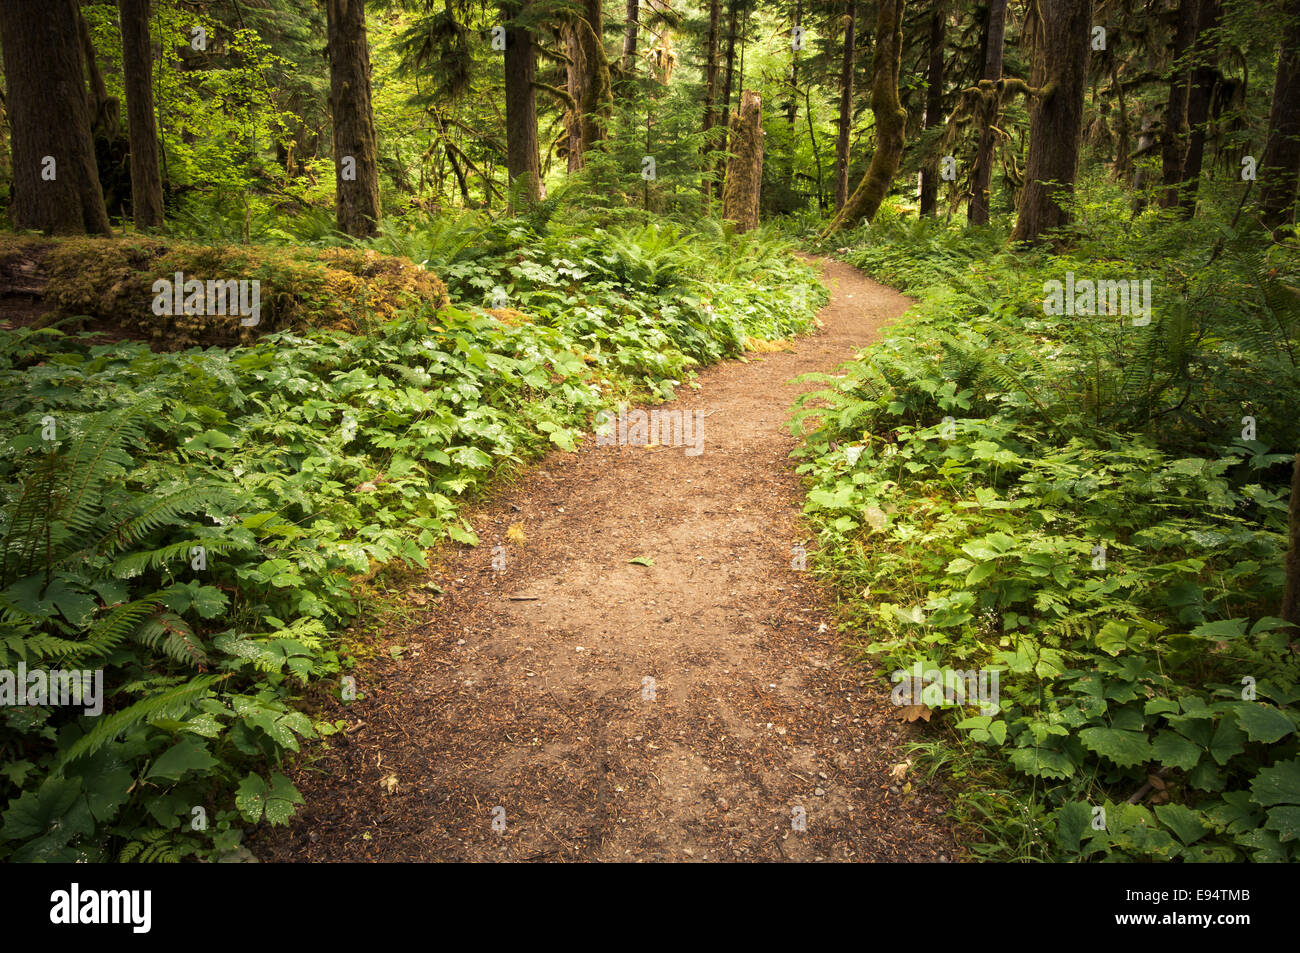 Trail through old growth forest, Staircase Area, Olympic National Park, Washington, USA Stock Photo